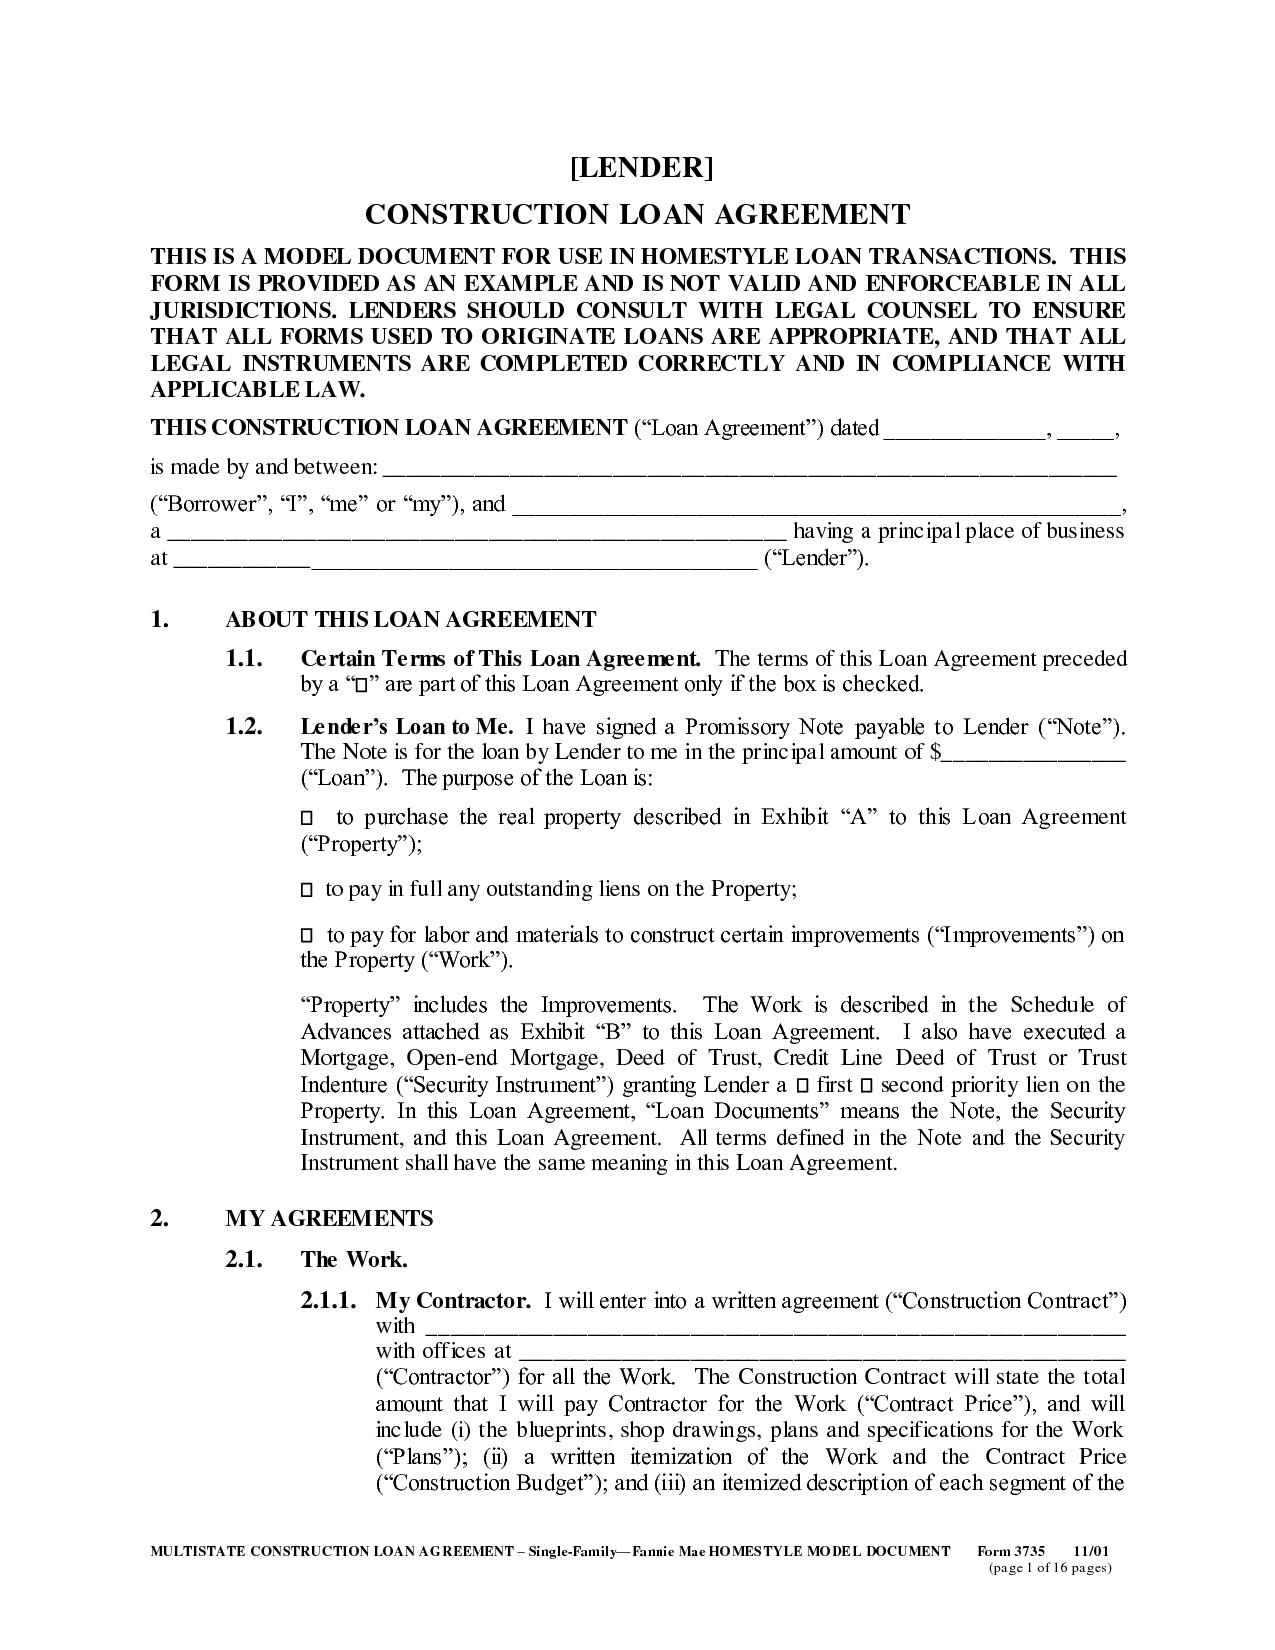 How To Write A Loan Agreement Mkl Template Loan Agreement Between Family Members Id147 Opendata